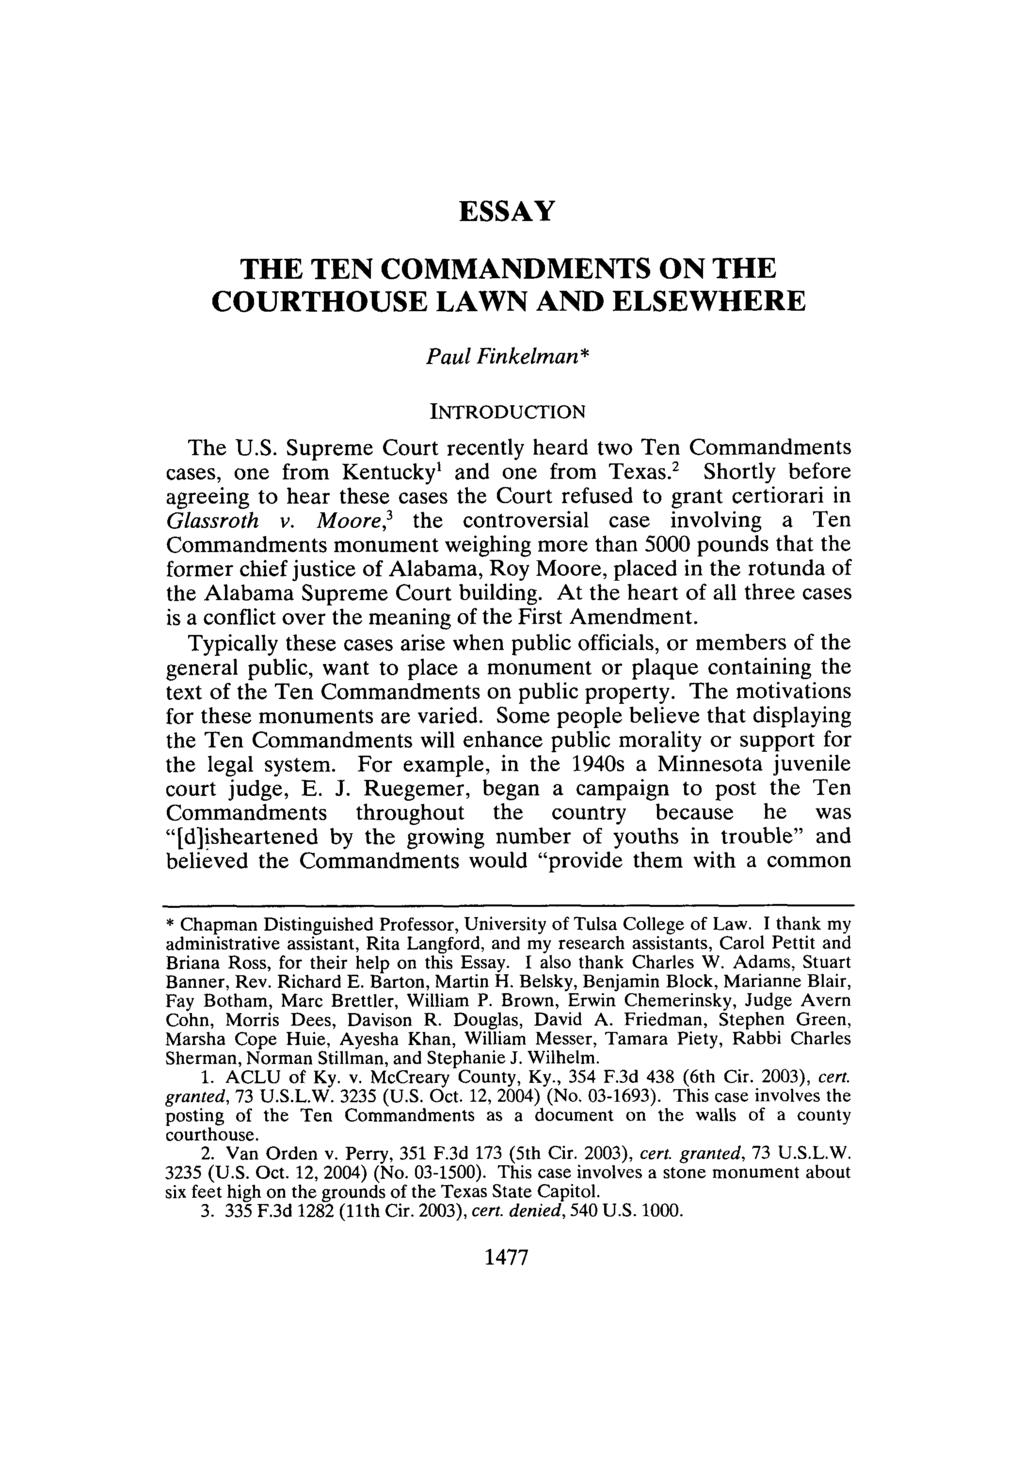 ESSAY THE TEN COMMANDMENTS ON THE COURTHOUSE LAWN AND ELSEWHERE Paul Finkelman* INTRODUCTION The U.S. Supreme Court recently heard two Ten Commandments cases, one from Kentucky 1 and one from Texas.